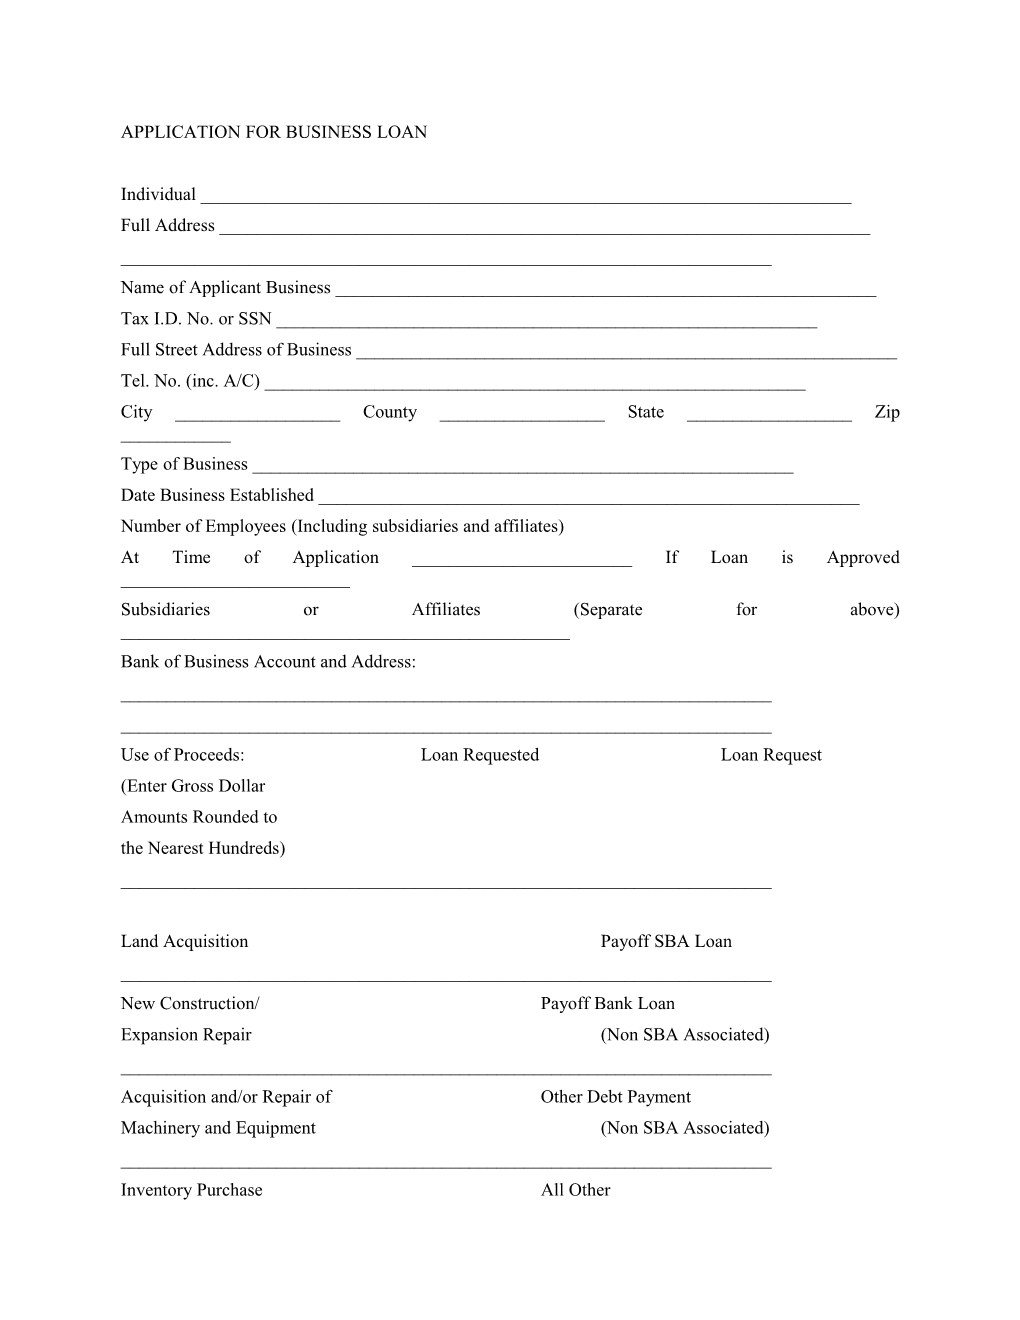 Application for Business Loan